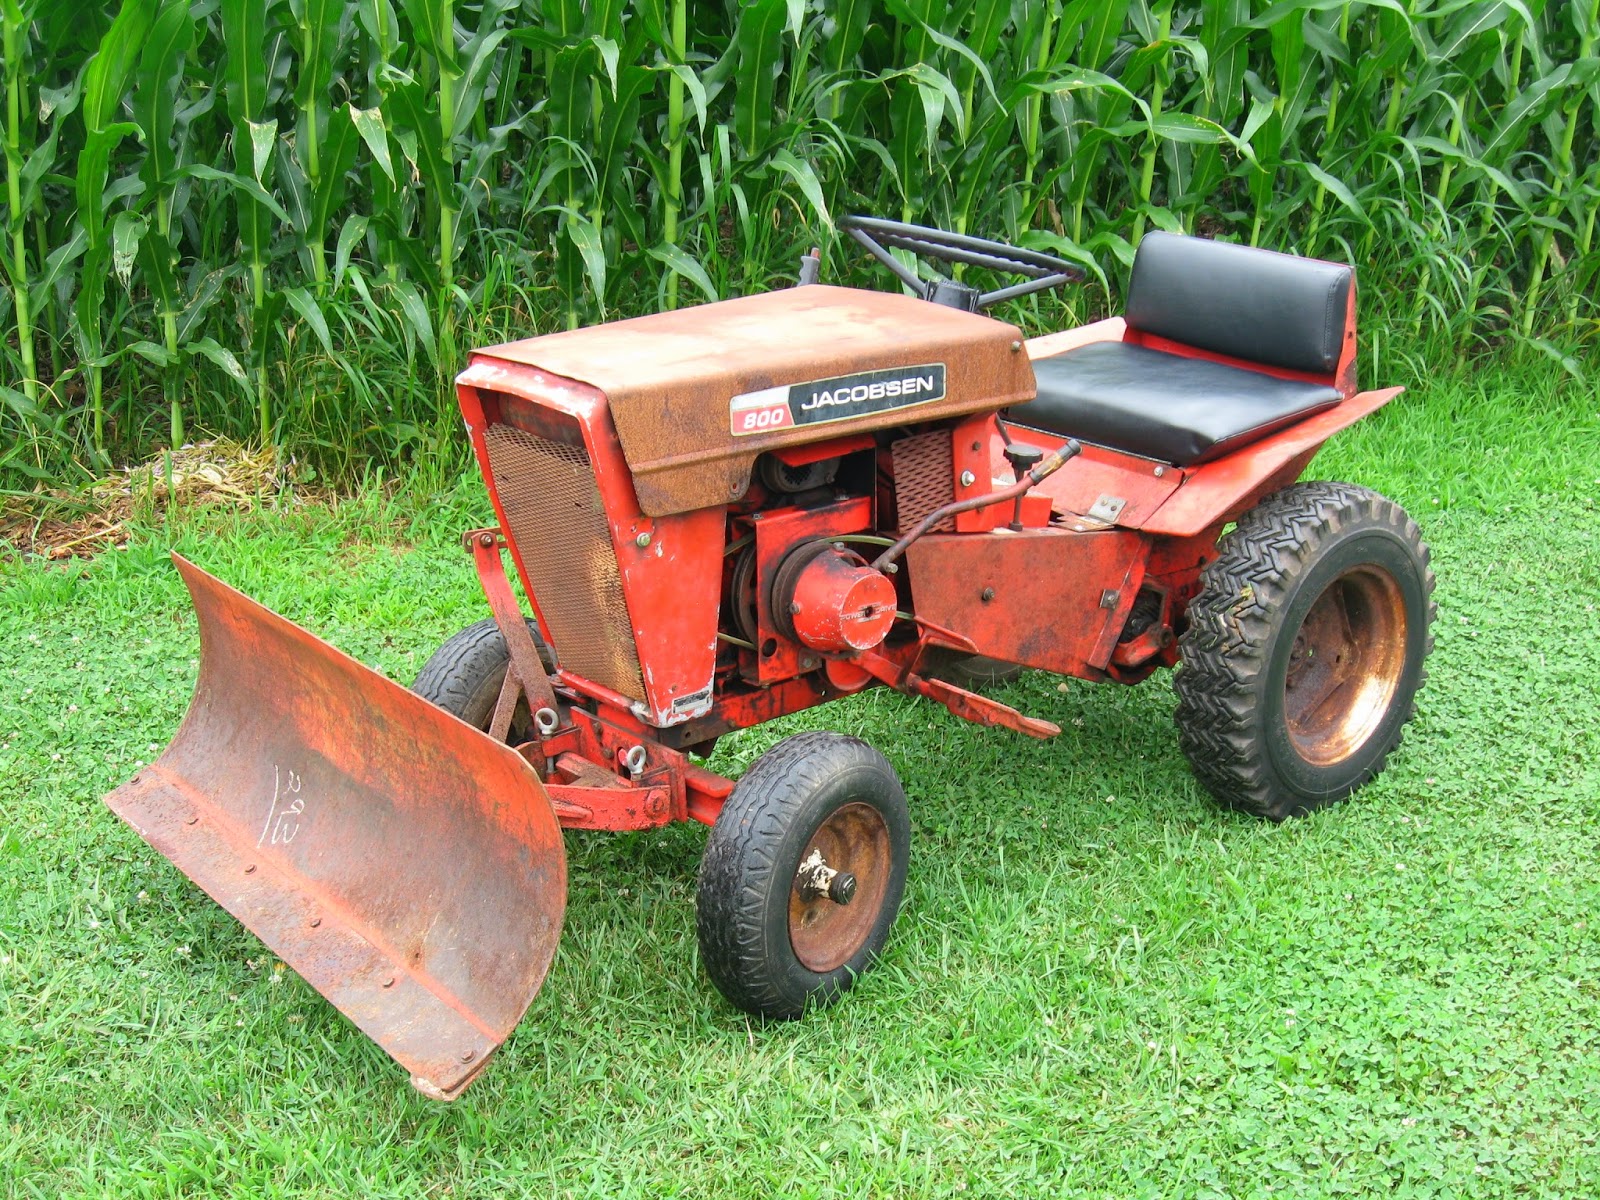 Here is my first Jacobsen tractor. My 1966 Jacobsen Chief 800. Has the ...